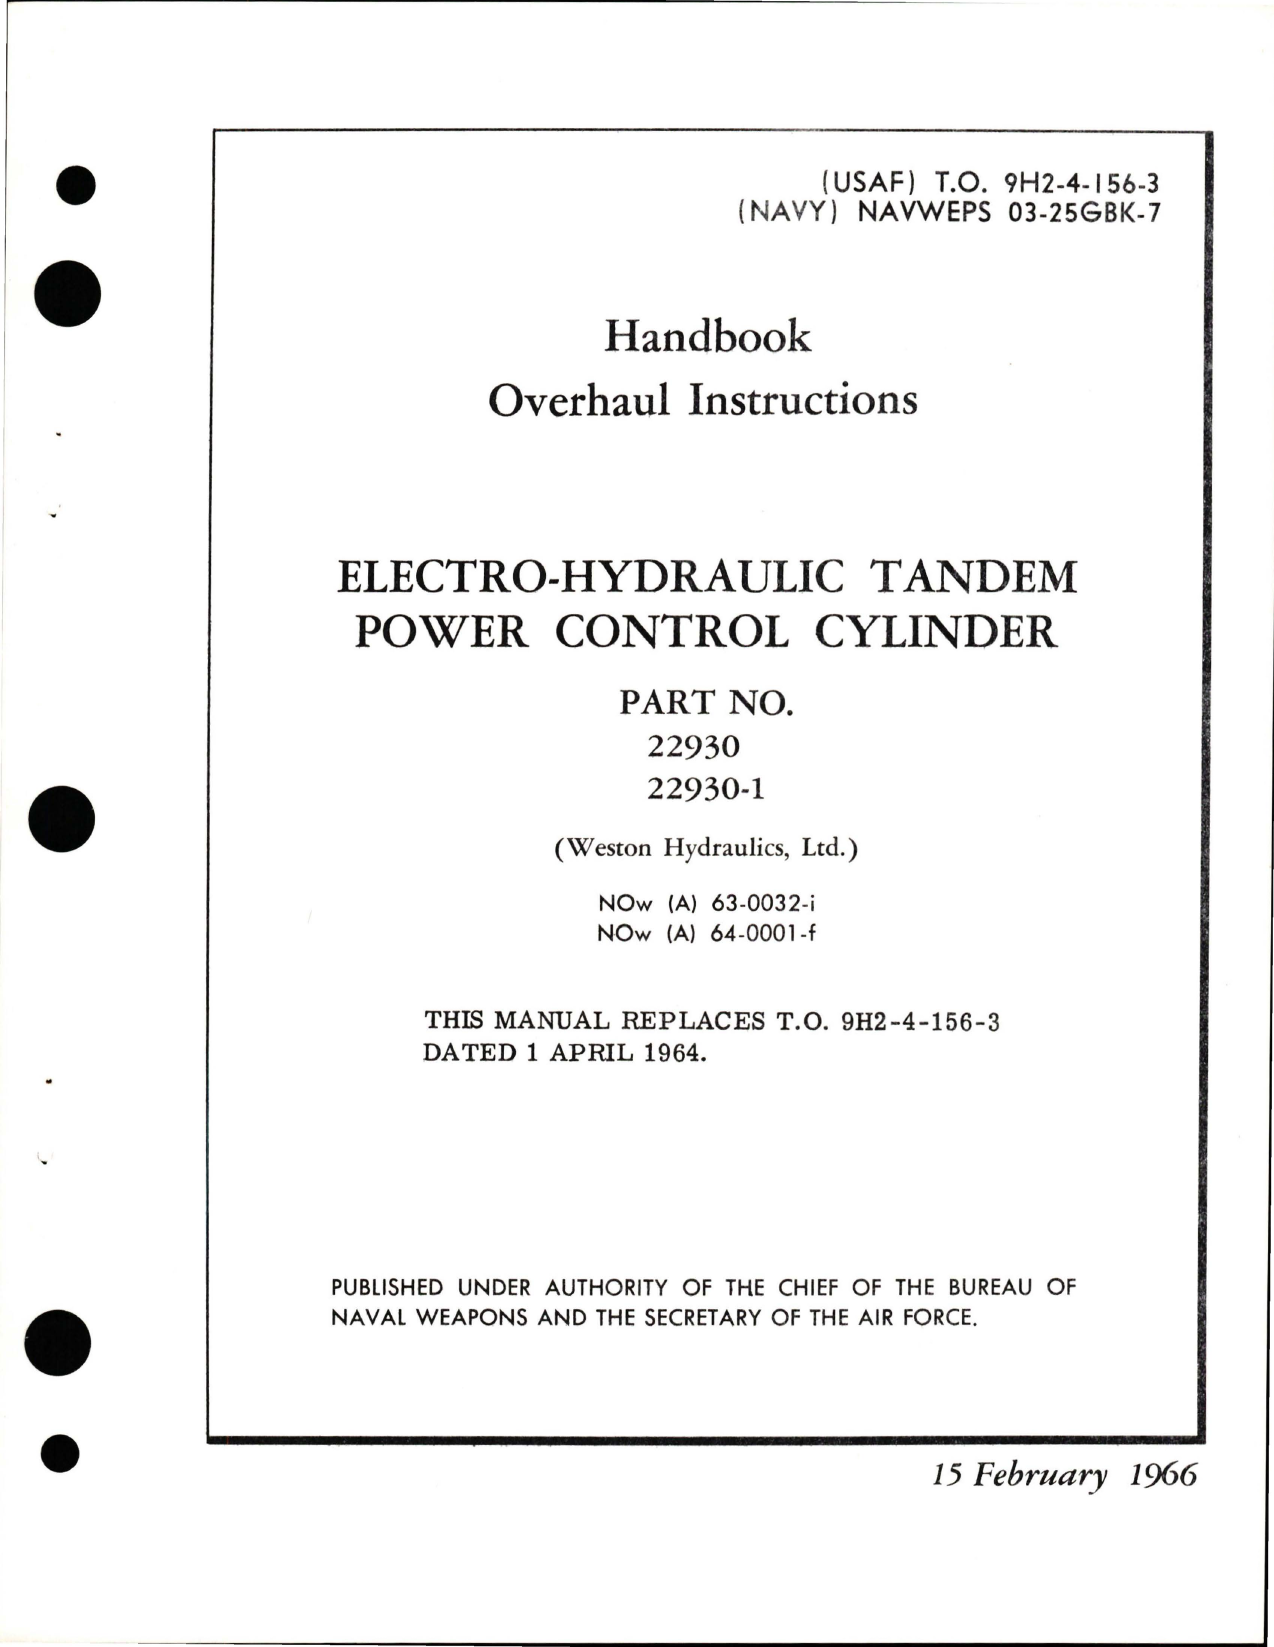 Sample page 1 from AirCorps Library document: Overhaul Instructions for Electro-Hydraulic Tandem Power Control Cylinder - Part 22930 and 22930-1